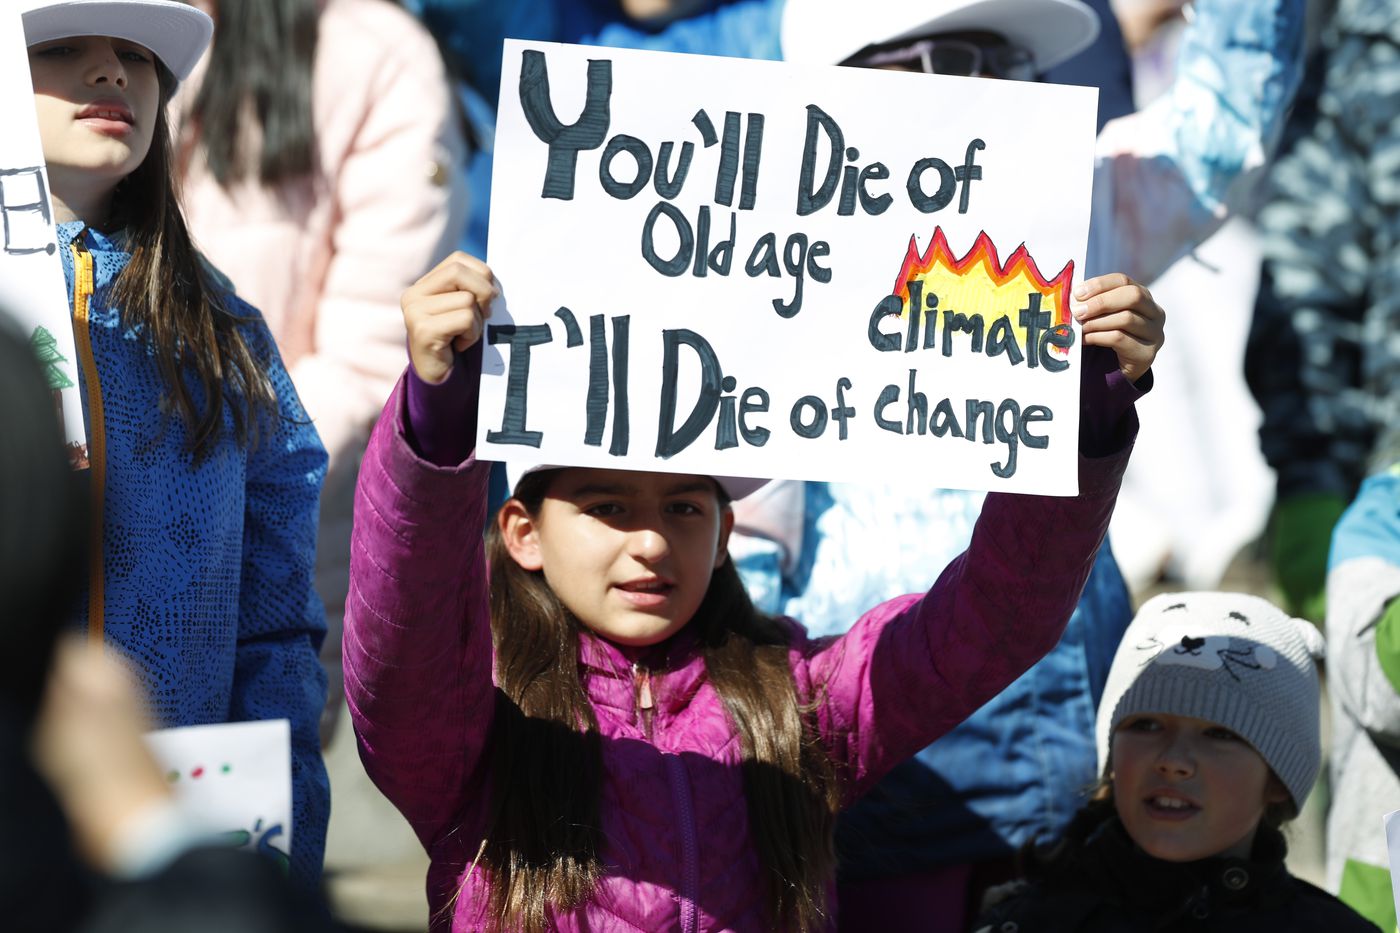 10-year-old Harper Phillips of Denver waves a placard as Swedish climate activist Greta Thunberg speaks to several thousand people at a climate strike rally Friday, Oct. 11, 2019, in Denver's Civic Center Park. 